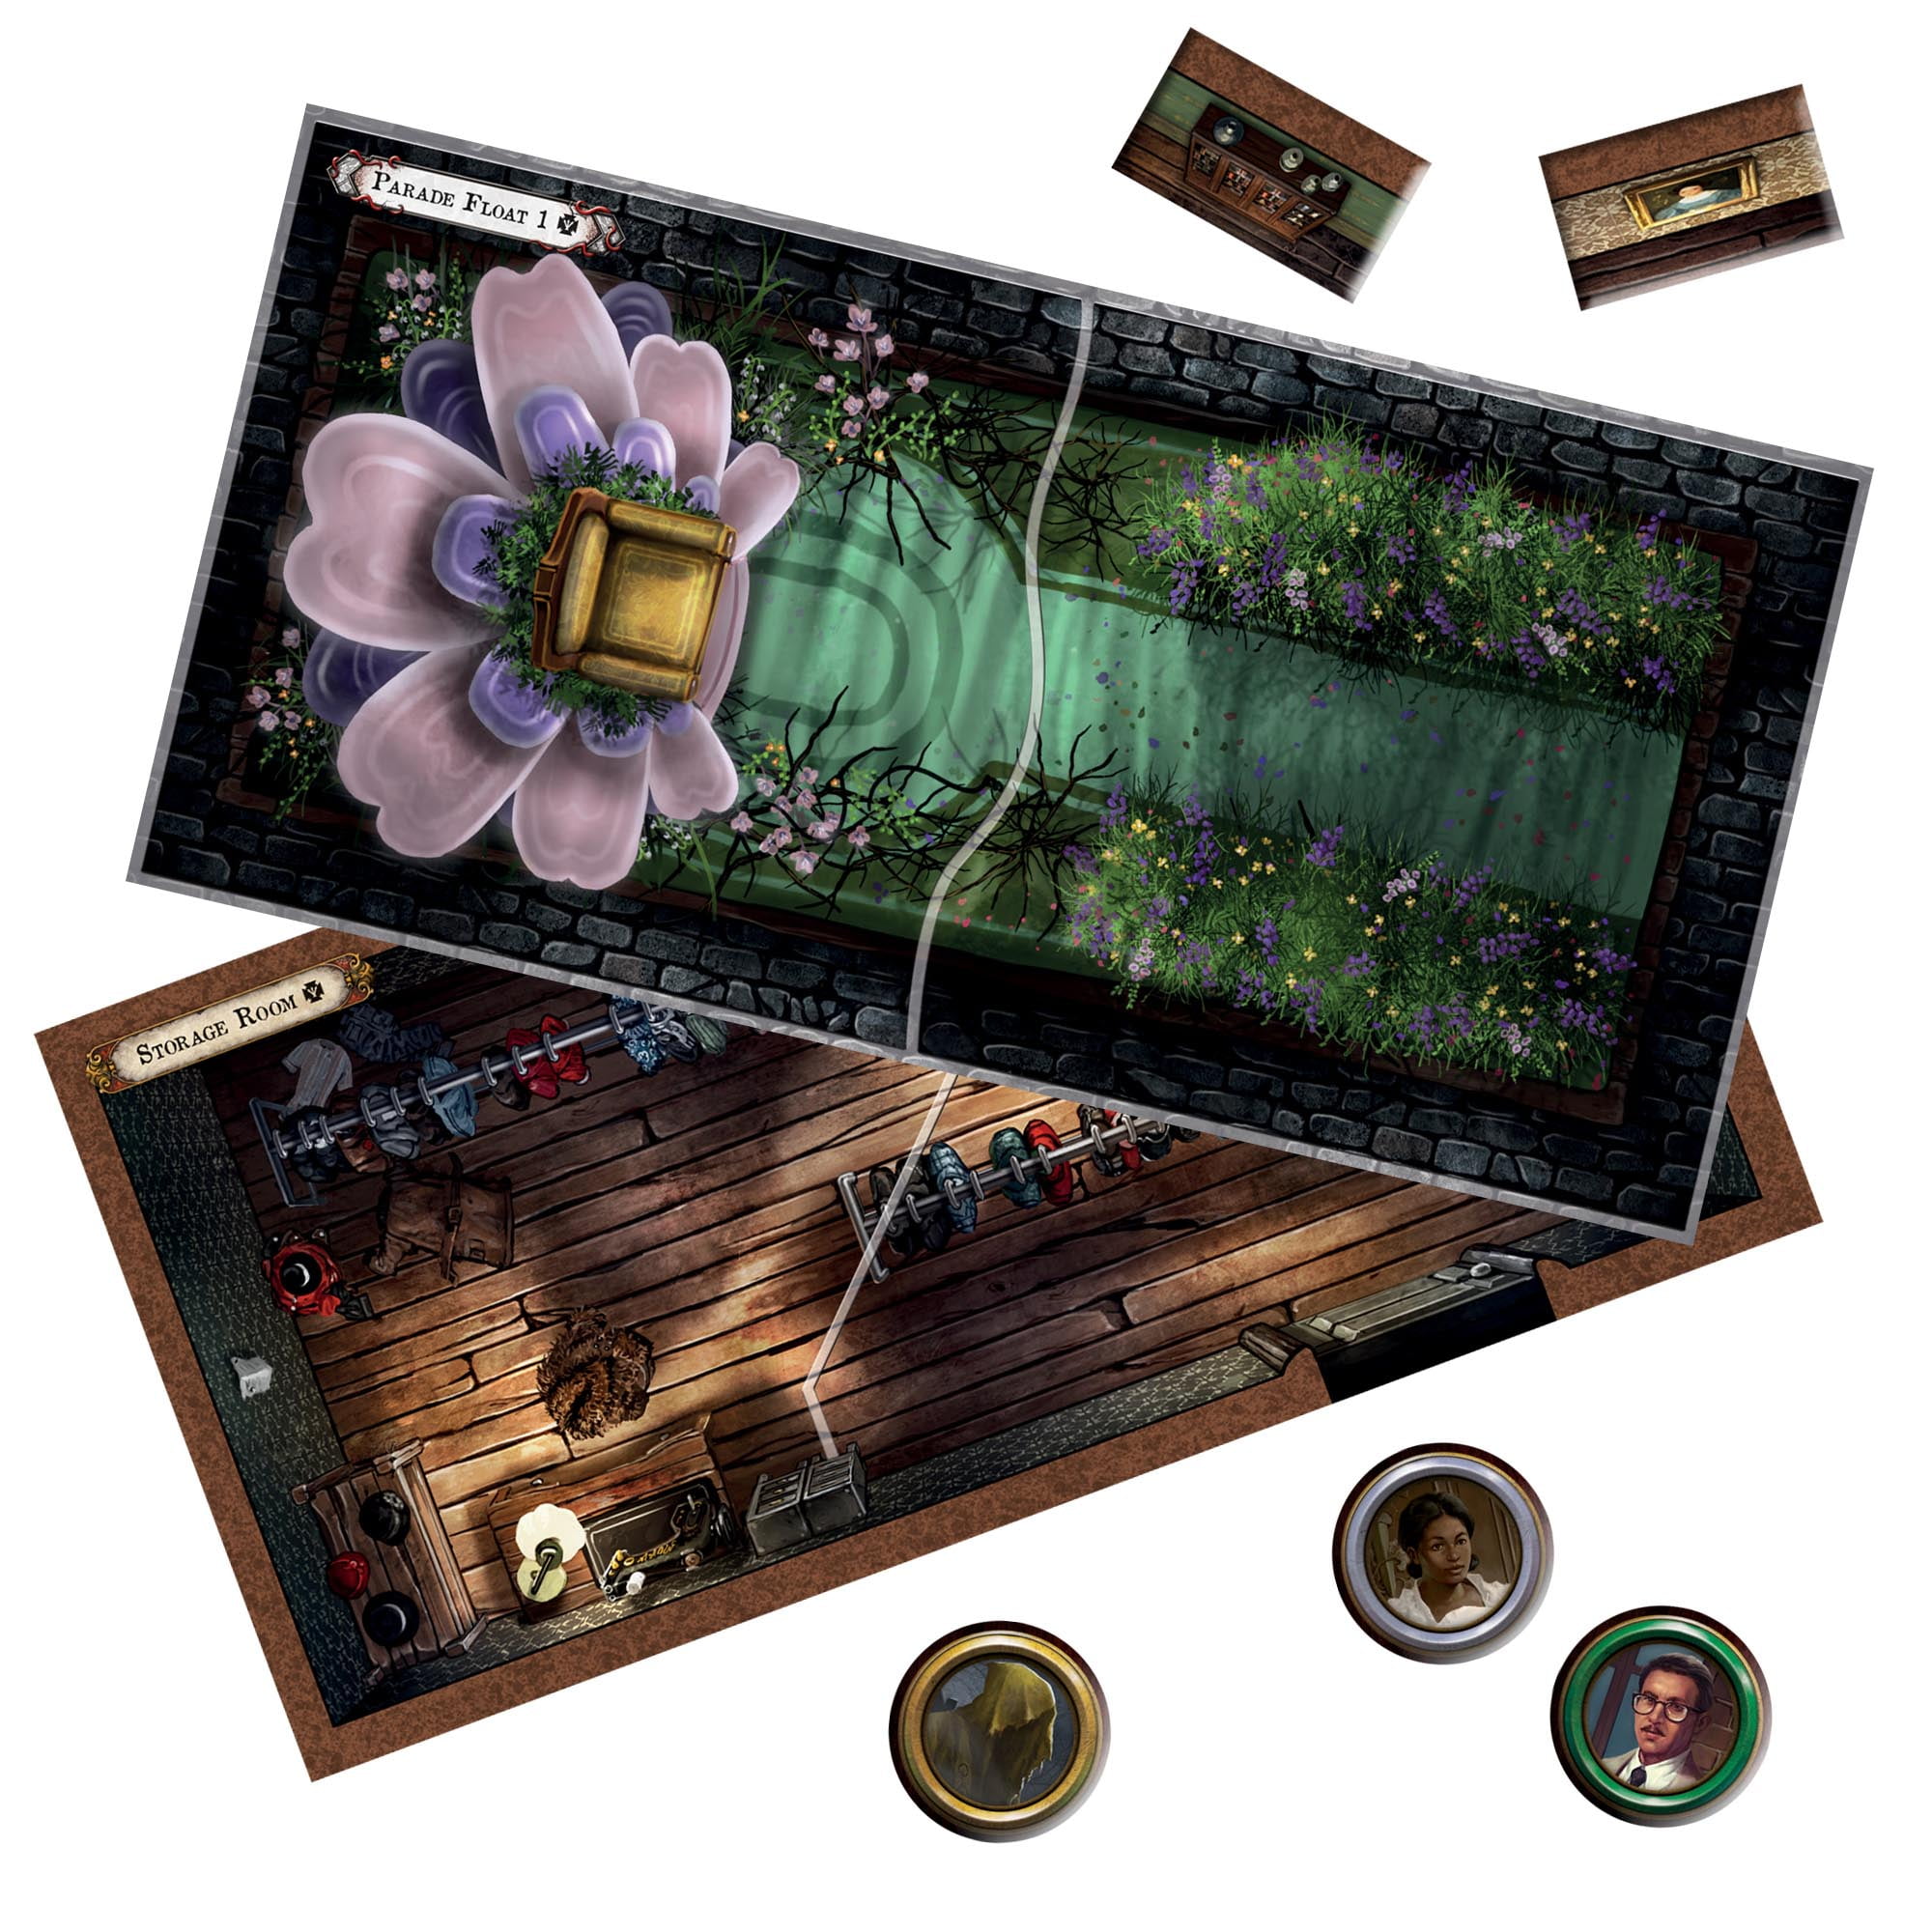 Mansions of Madness Sanctum of Twilight Expansion - Confront the Shadows of  the Order! Cooperative Mystery Game, Ages 14+, 1-5 Players, 2-3 Hour